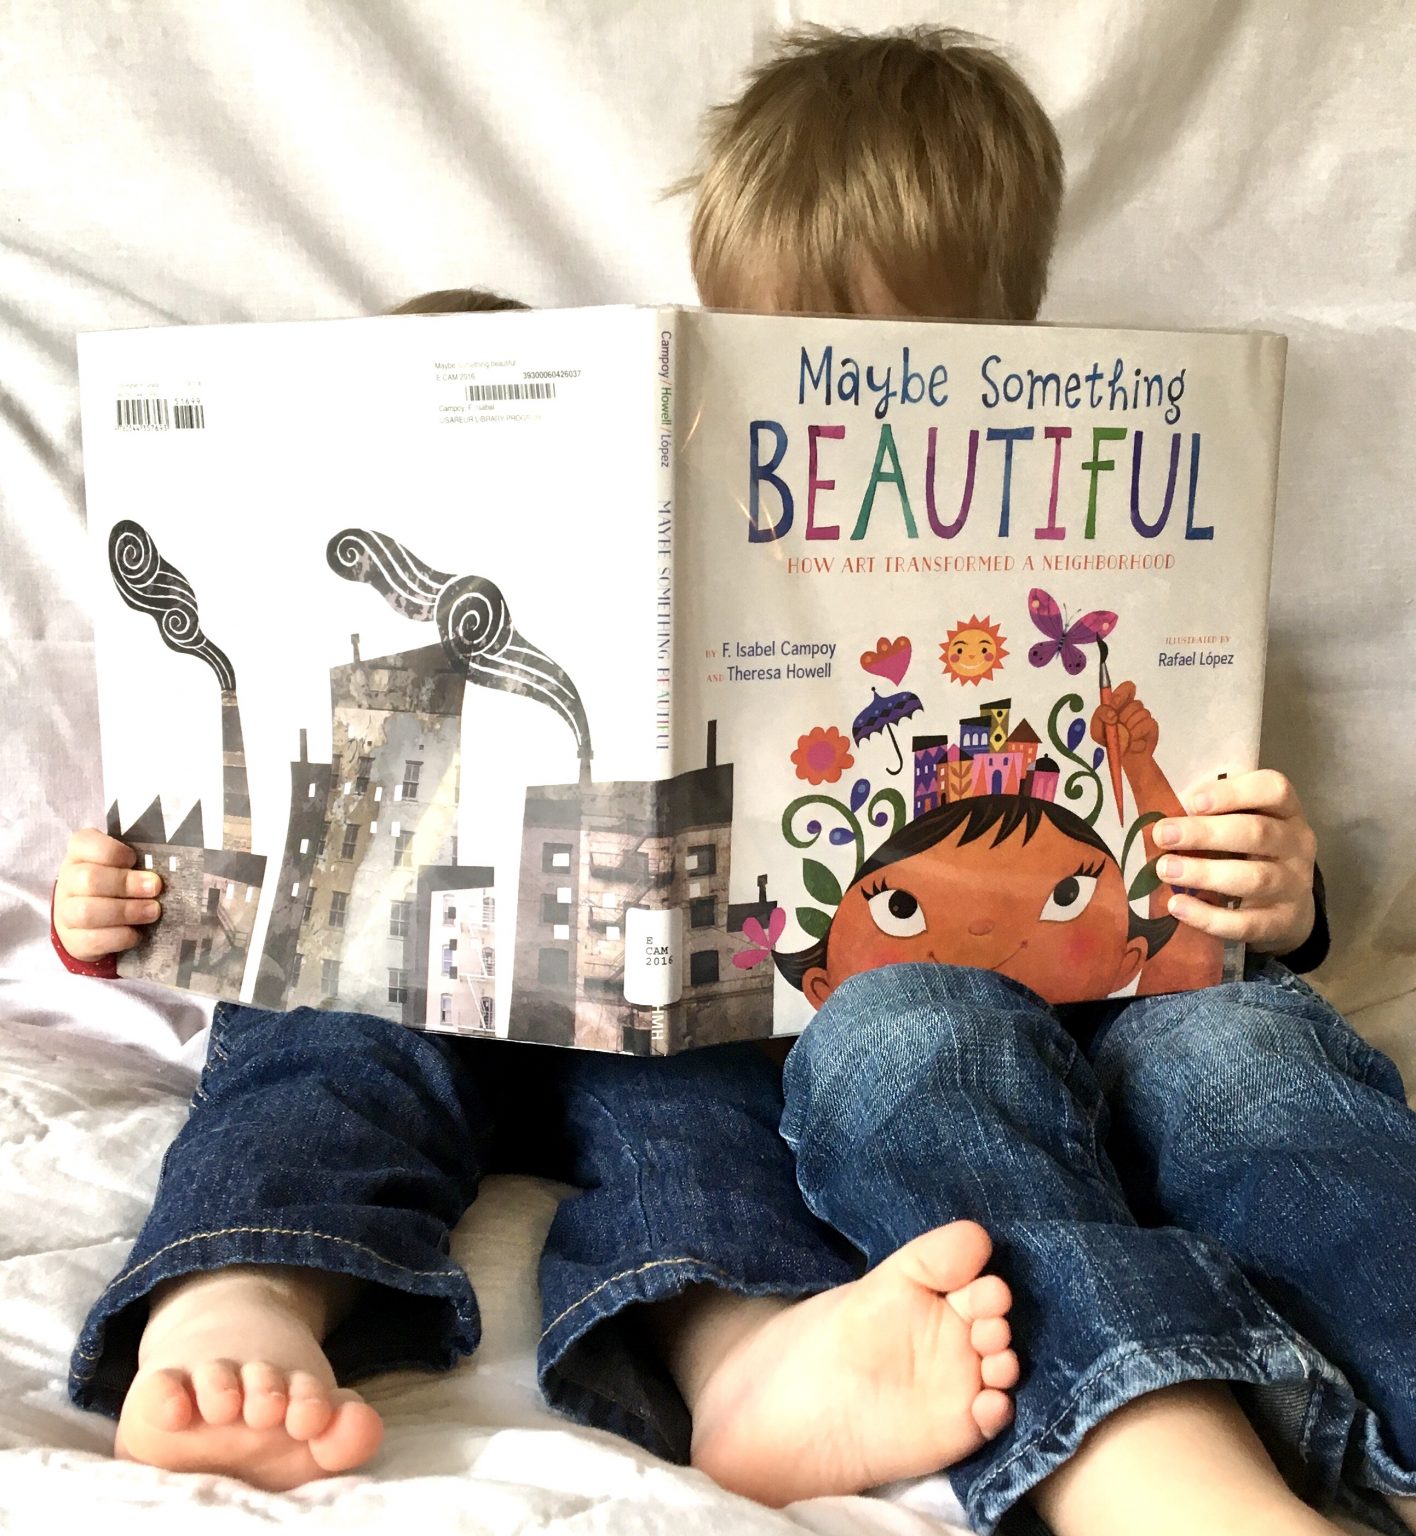 Maybe Something Beautiful by F. Isabel Campoy